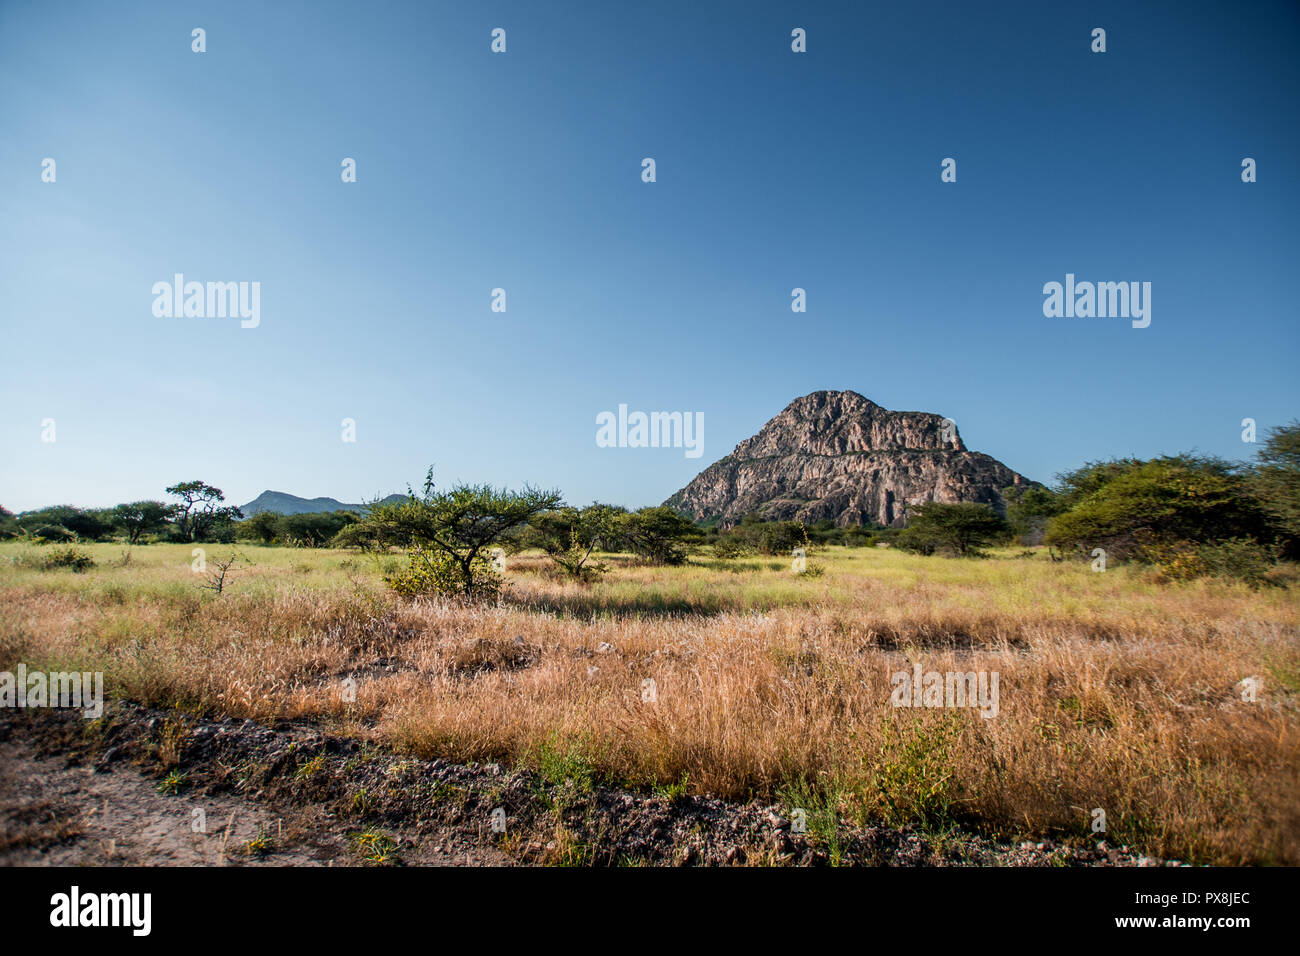 A view of the male hill at Tsodilo Hills, a UNESCO world heritage site featuring ancient San rock paintings. Pictured amid grassy and arid plains Stock Photo